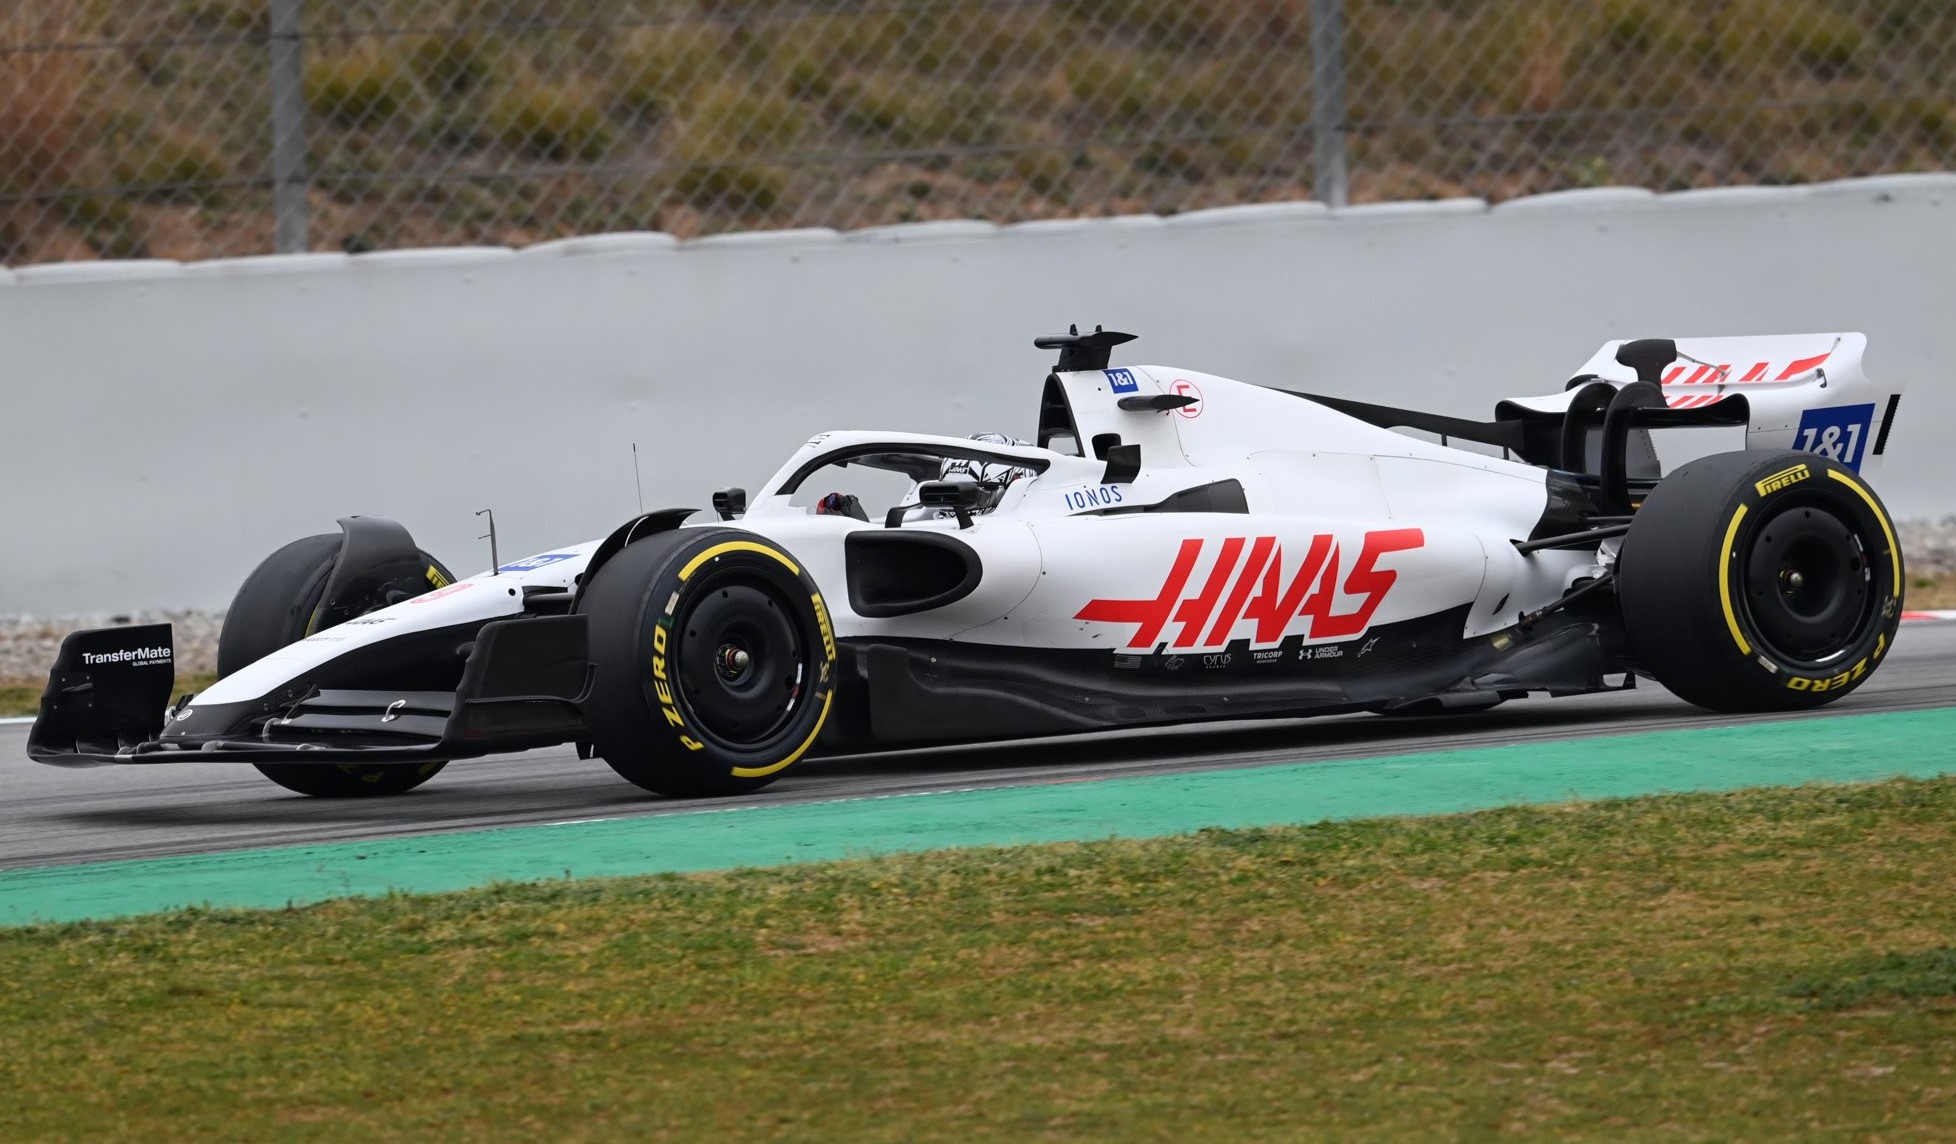 Haas run their cars with an all white livery after dropping Russian sponsor